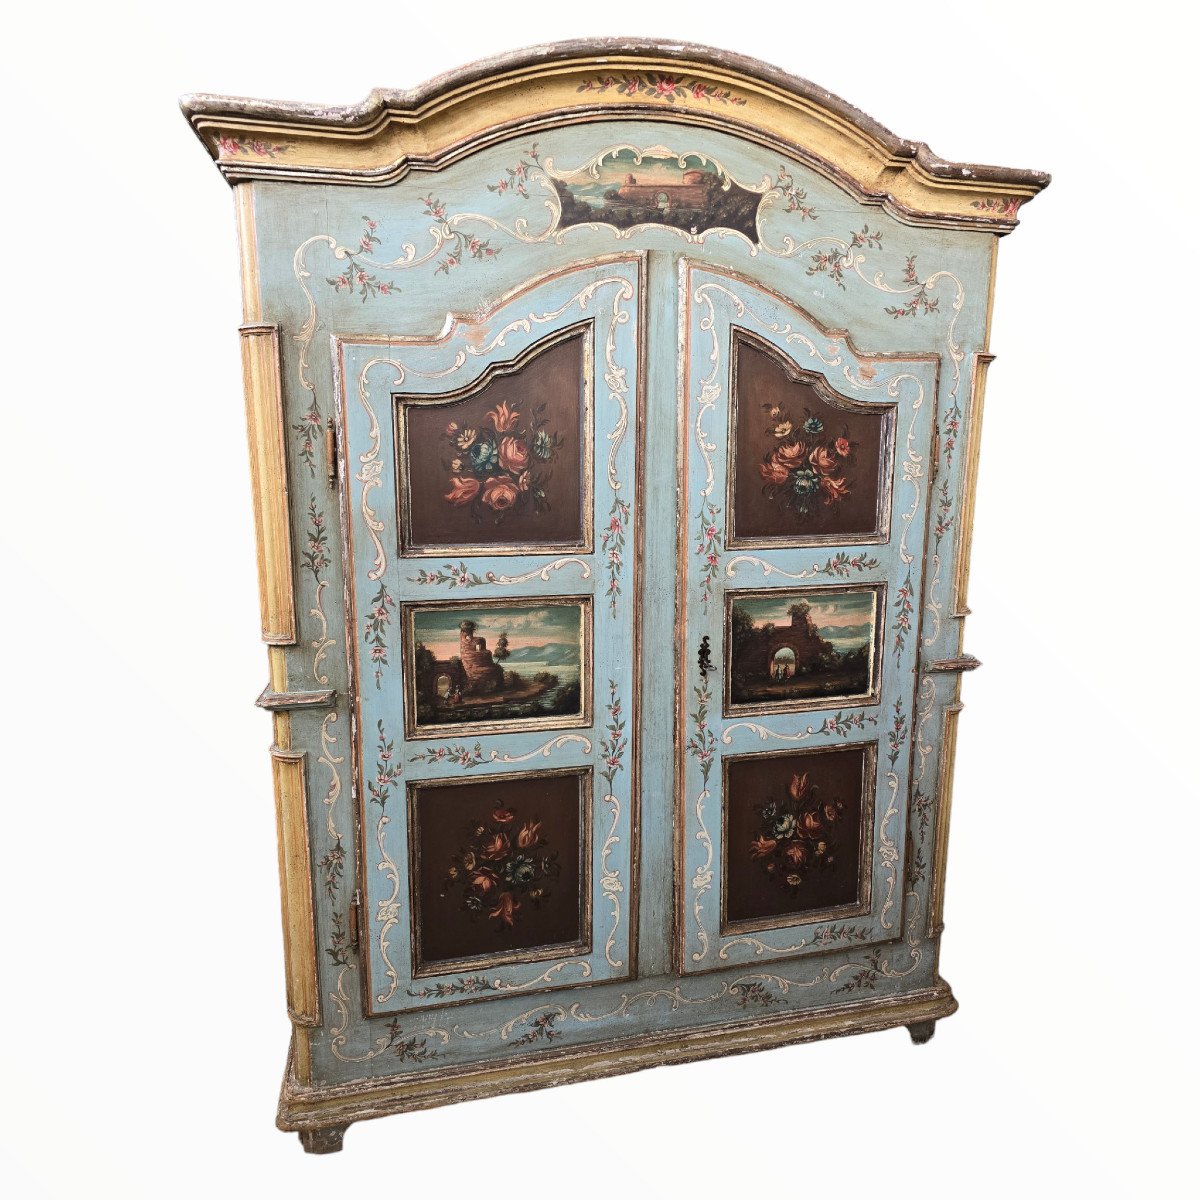 Antique 17th Century Painted Wooden Wardrobe With Painted Scenes-photo-2